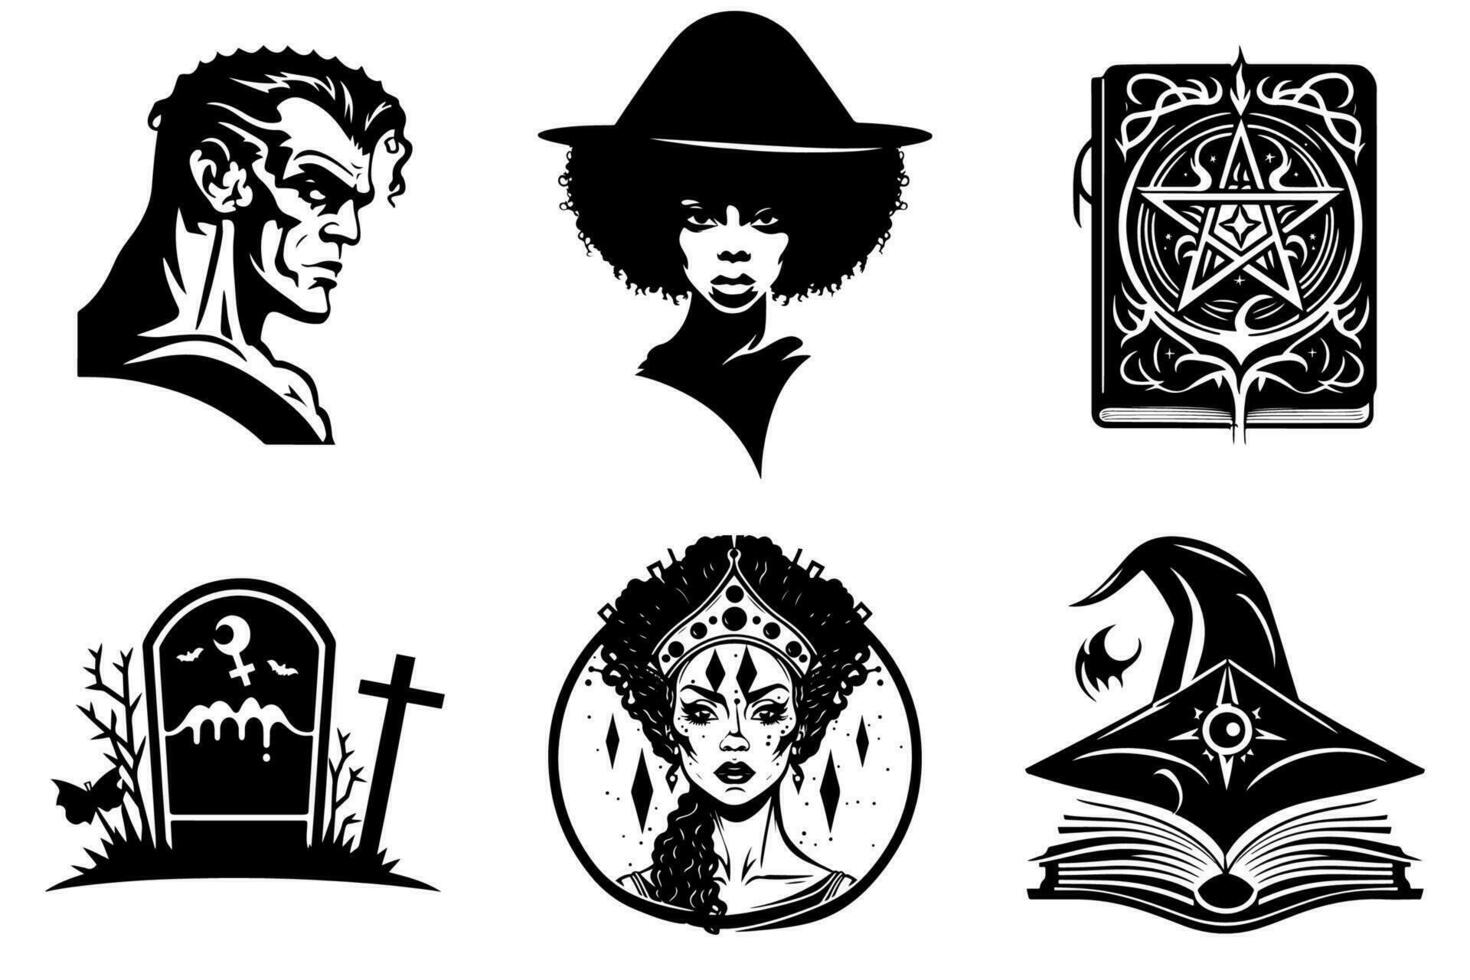 Scary monster, witch, spell books, tombstone, voodoo priestess - Halloween graphics set, black and white, isolated. vector